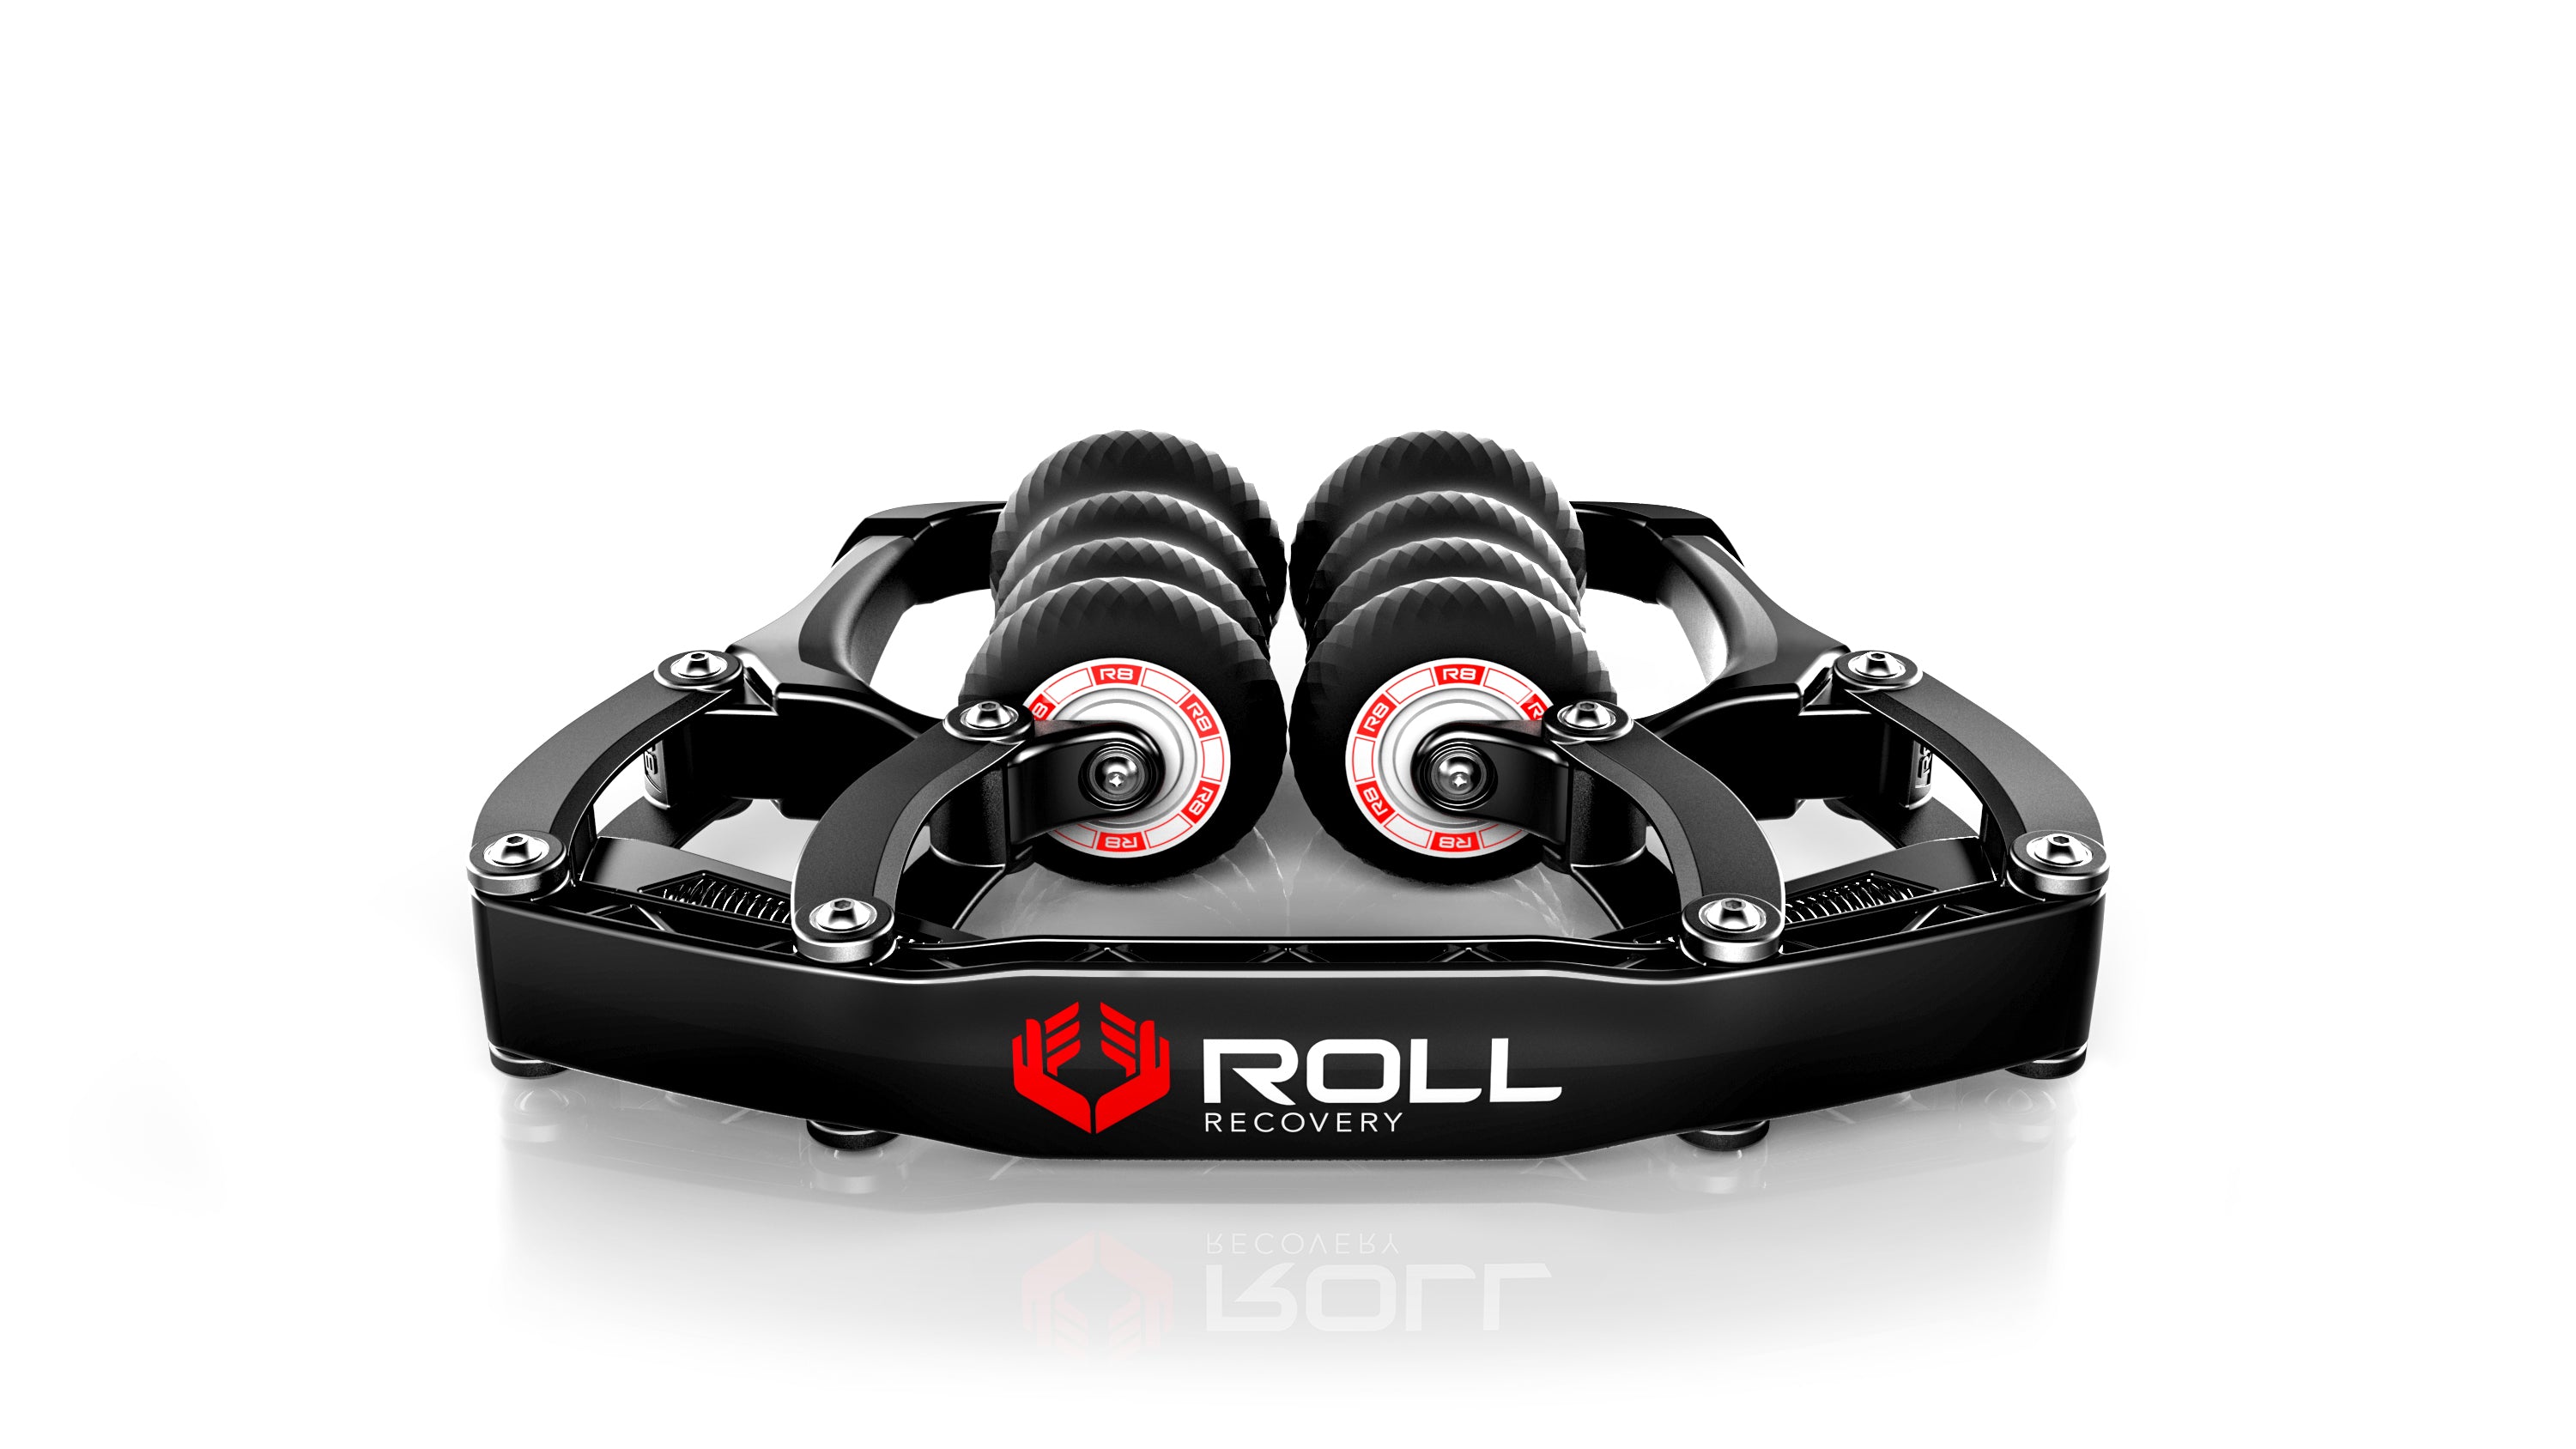 PRESS RELEASE Introducing our new R8 ROLL Recovery